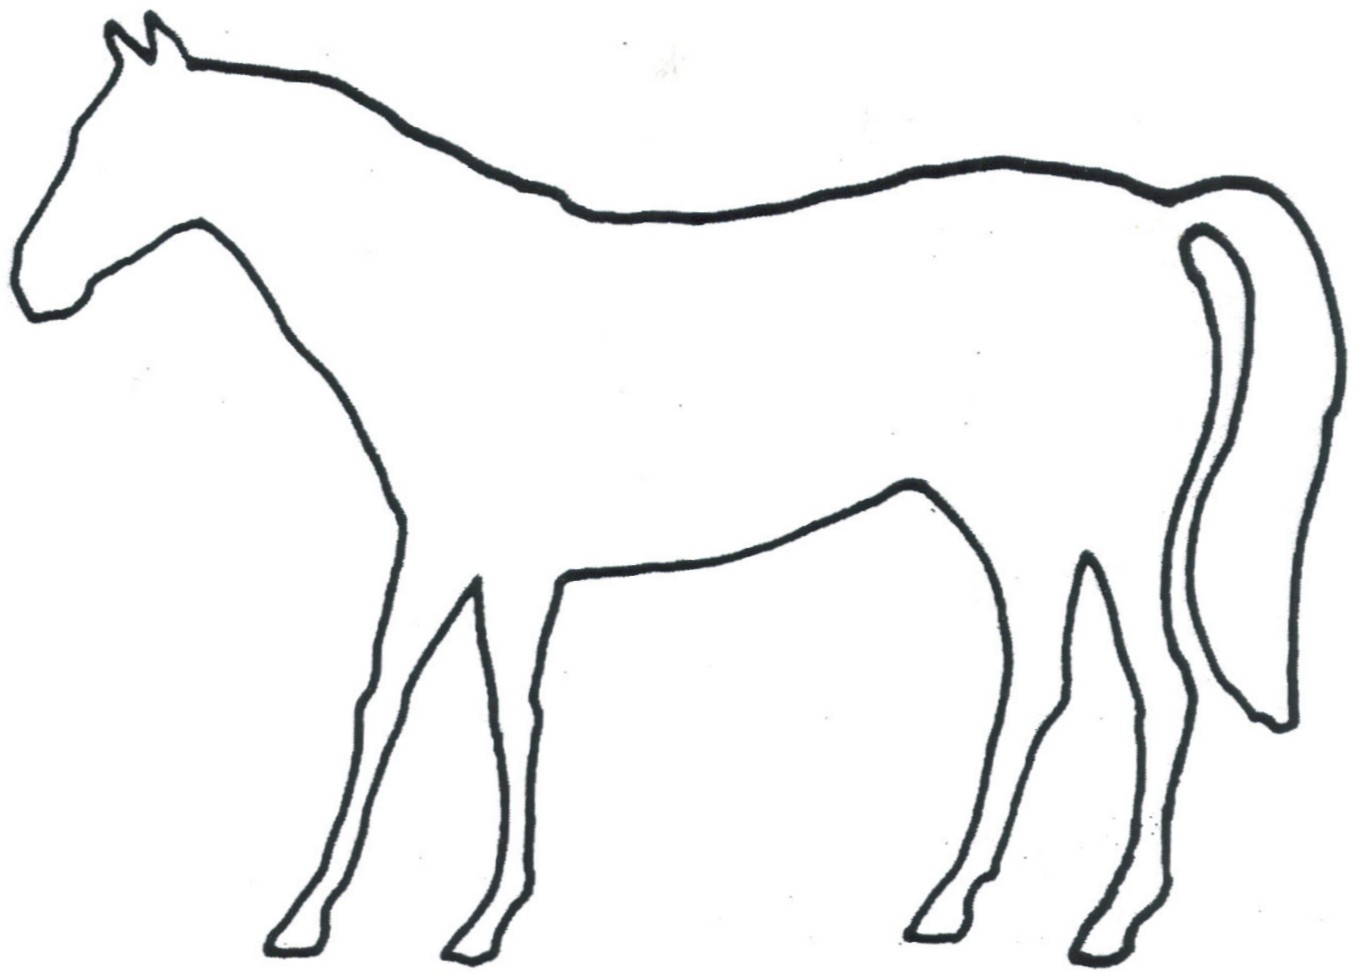 Free Outline Drawings Of Animals, Download Free Outline Drawings Of